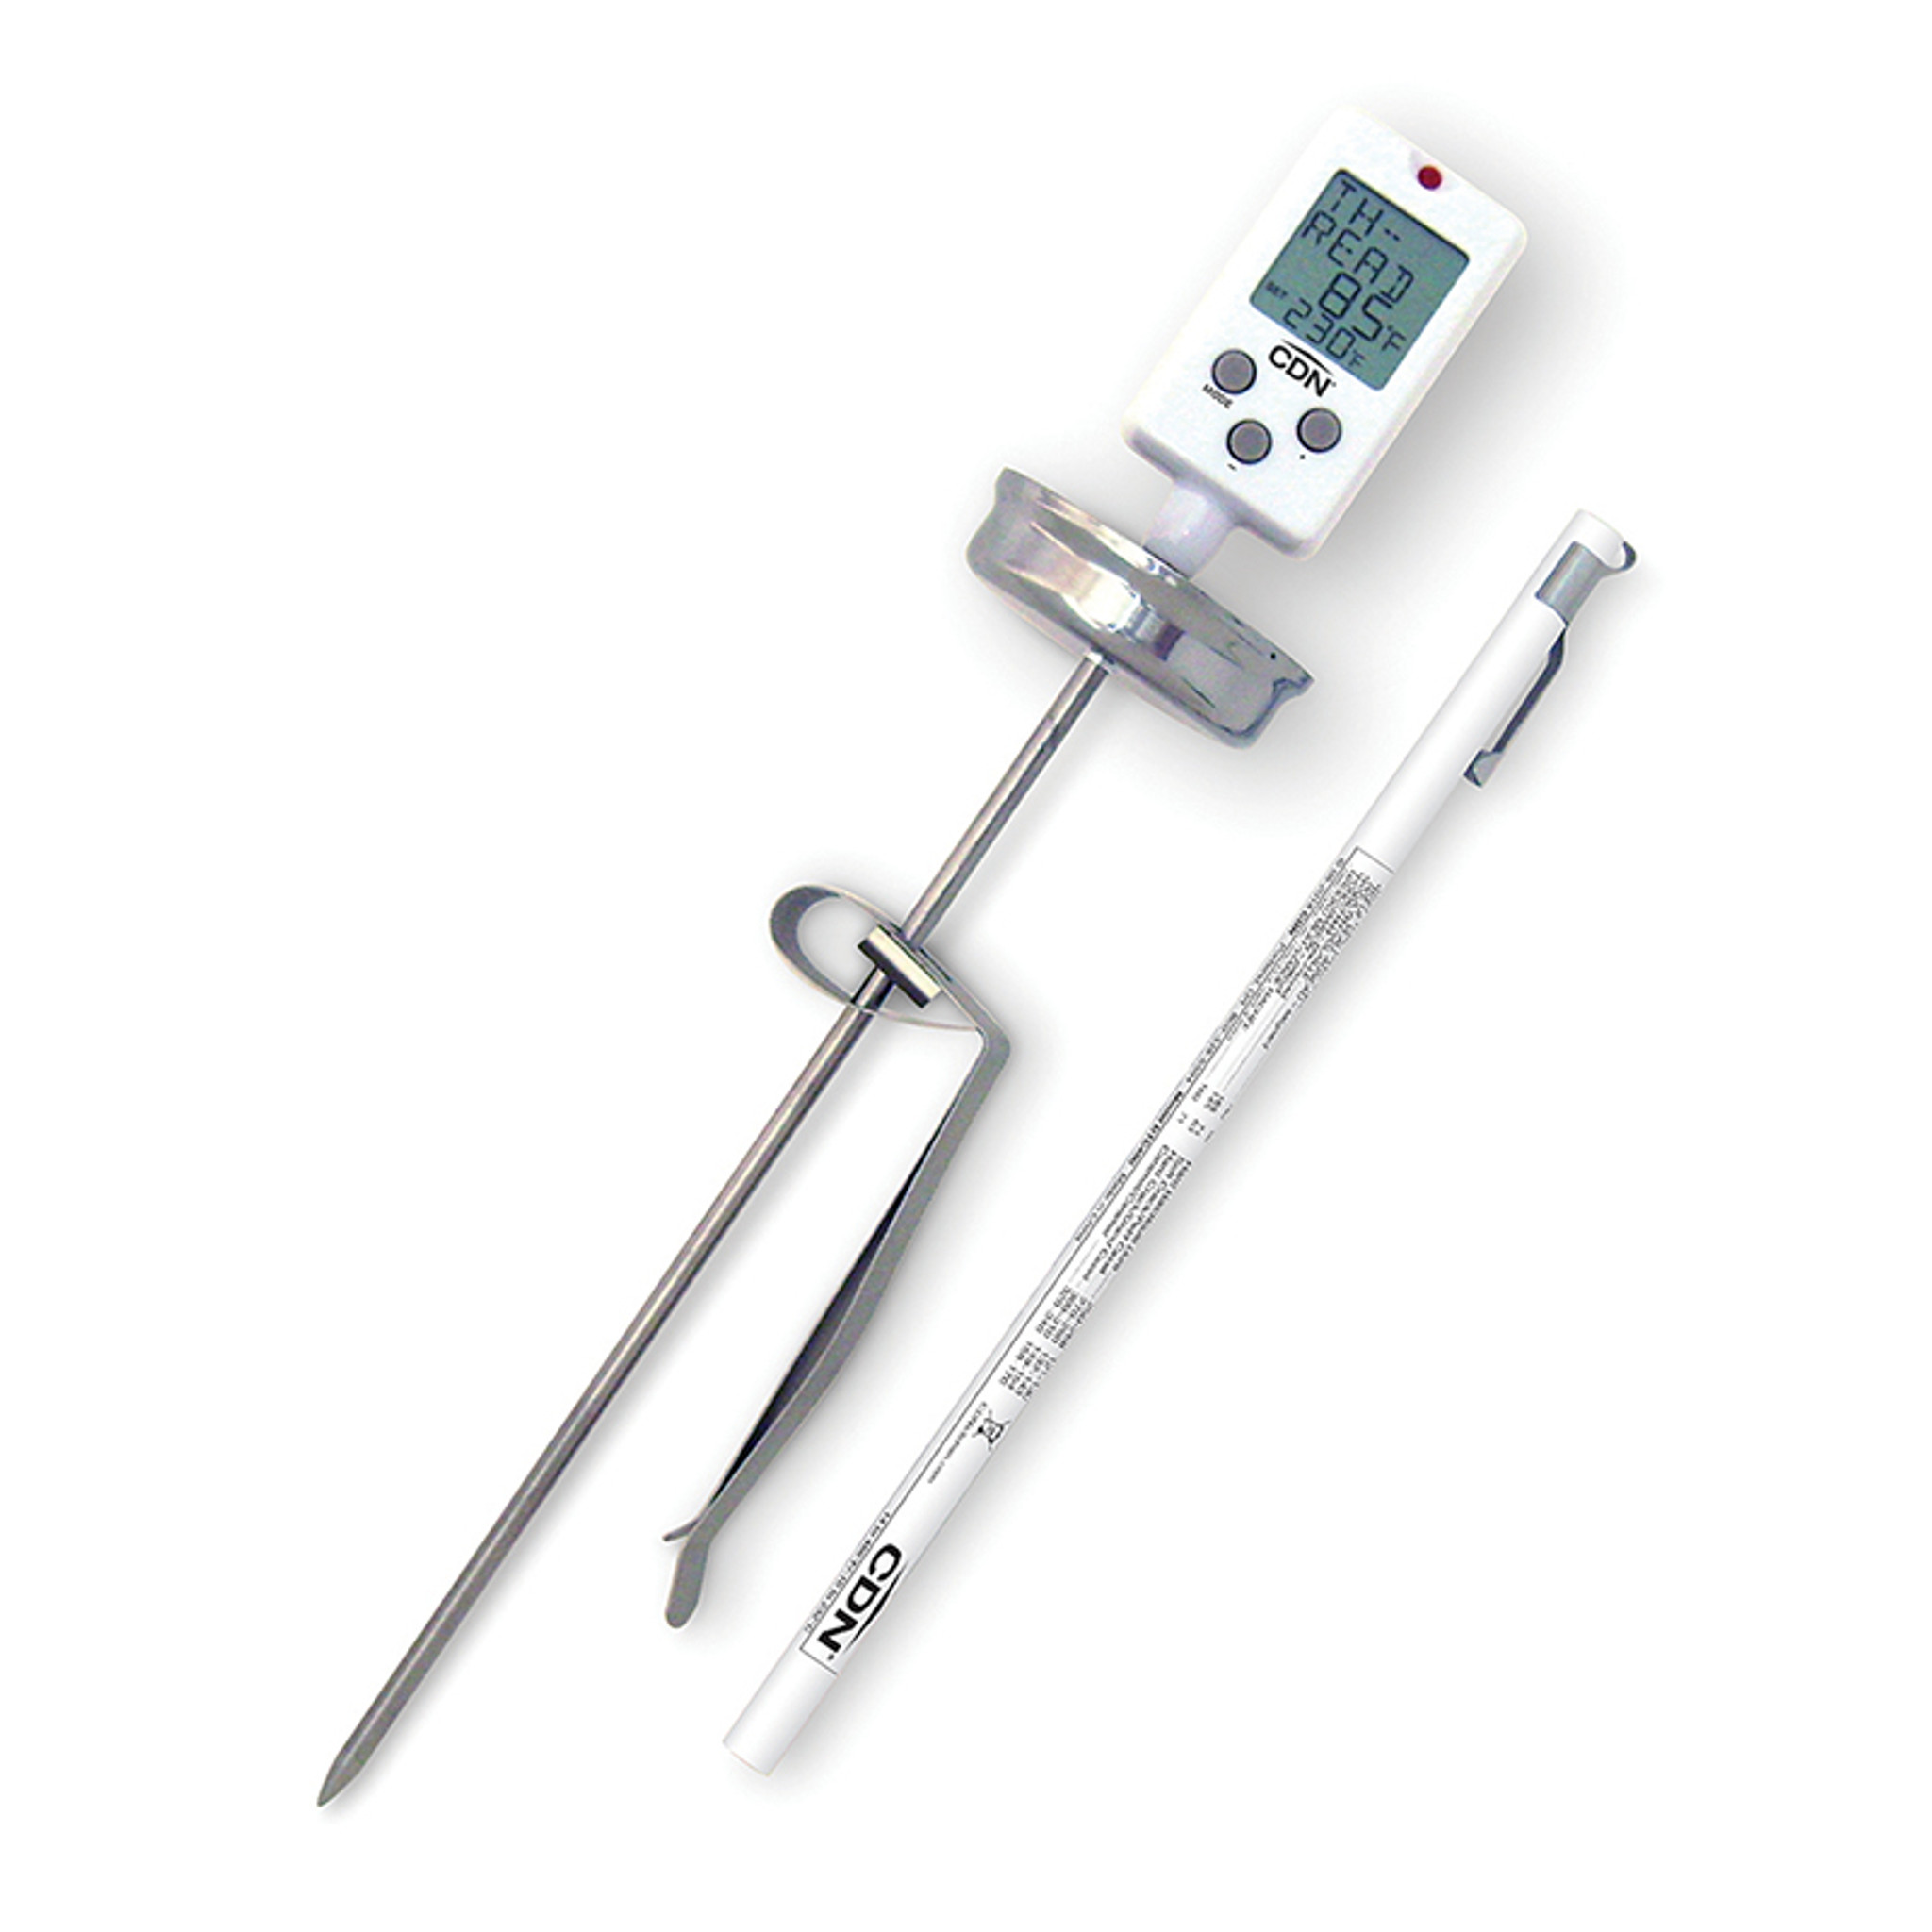 Candy and Deep-Fry Thermometer